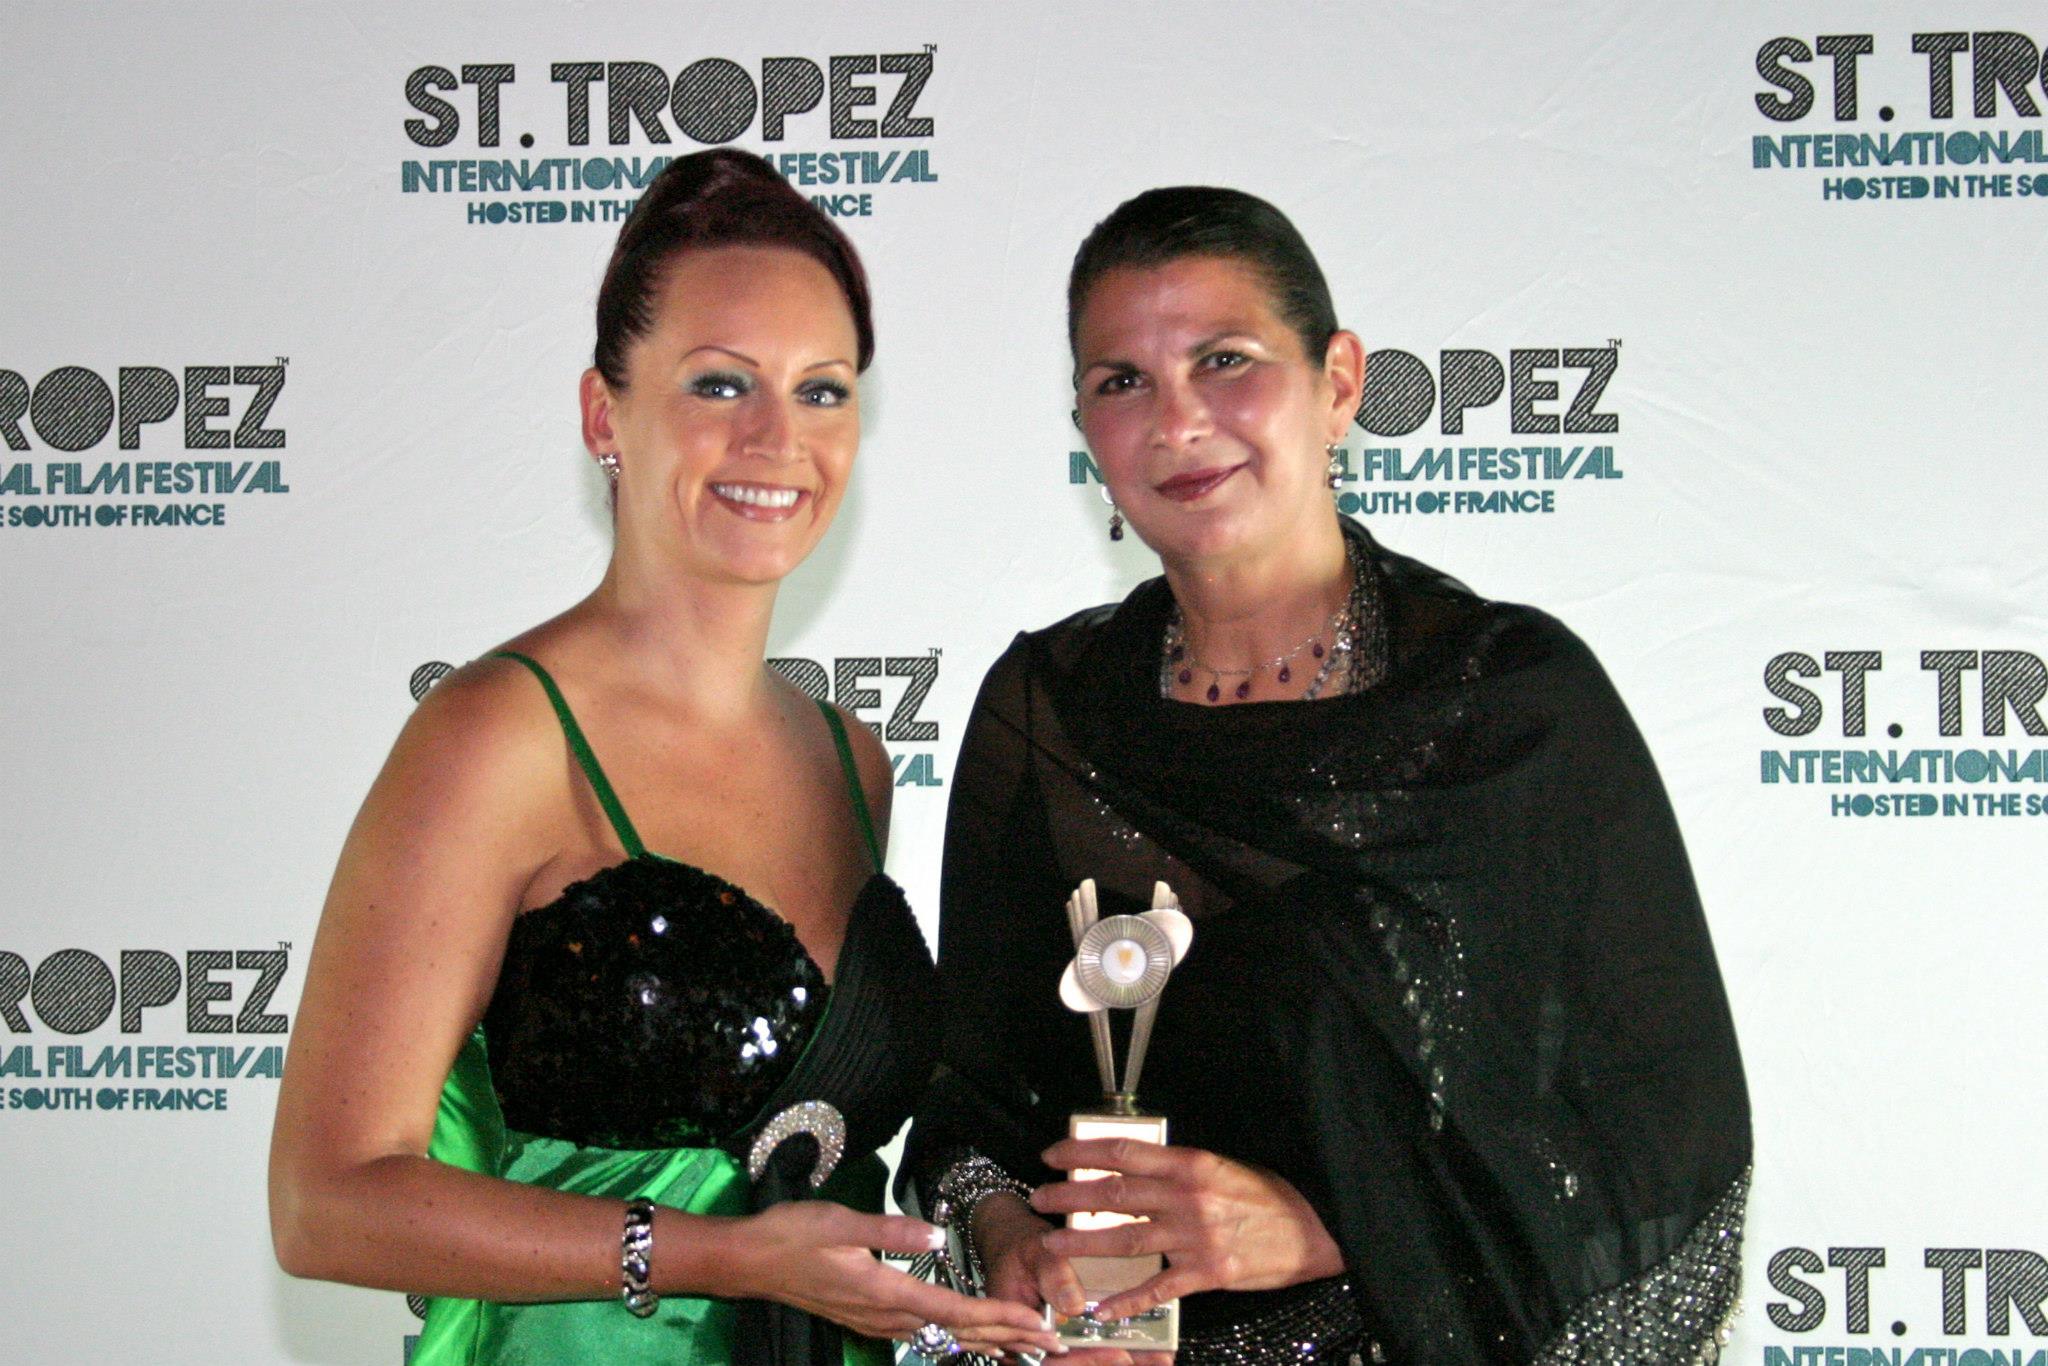 Accepting the award for best supporting actress in France.